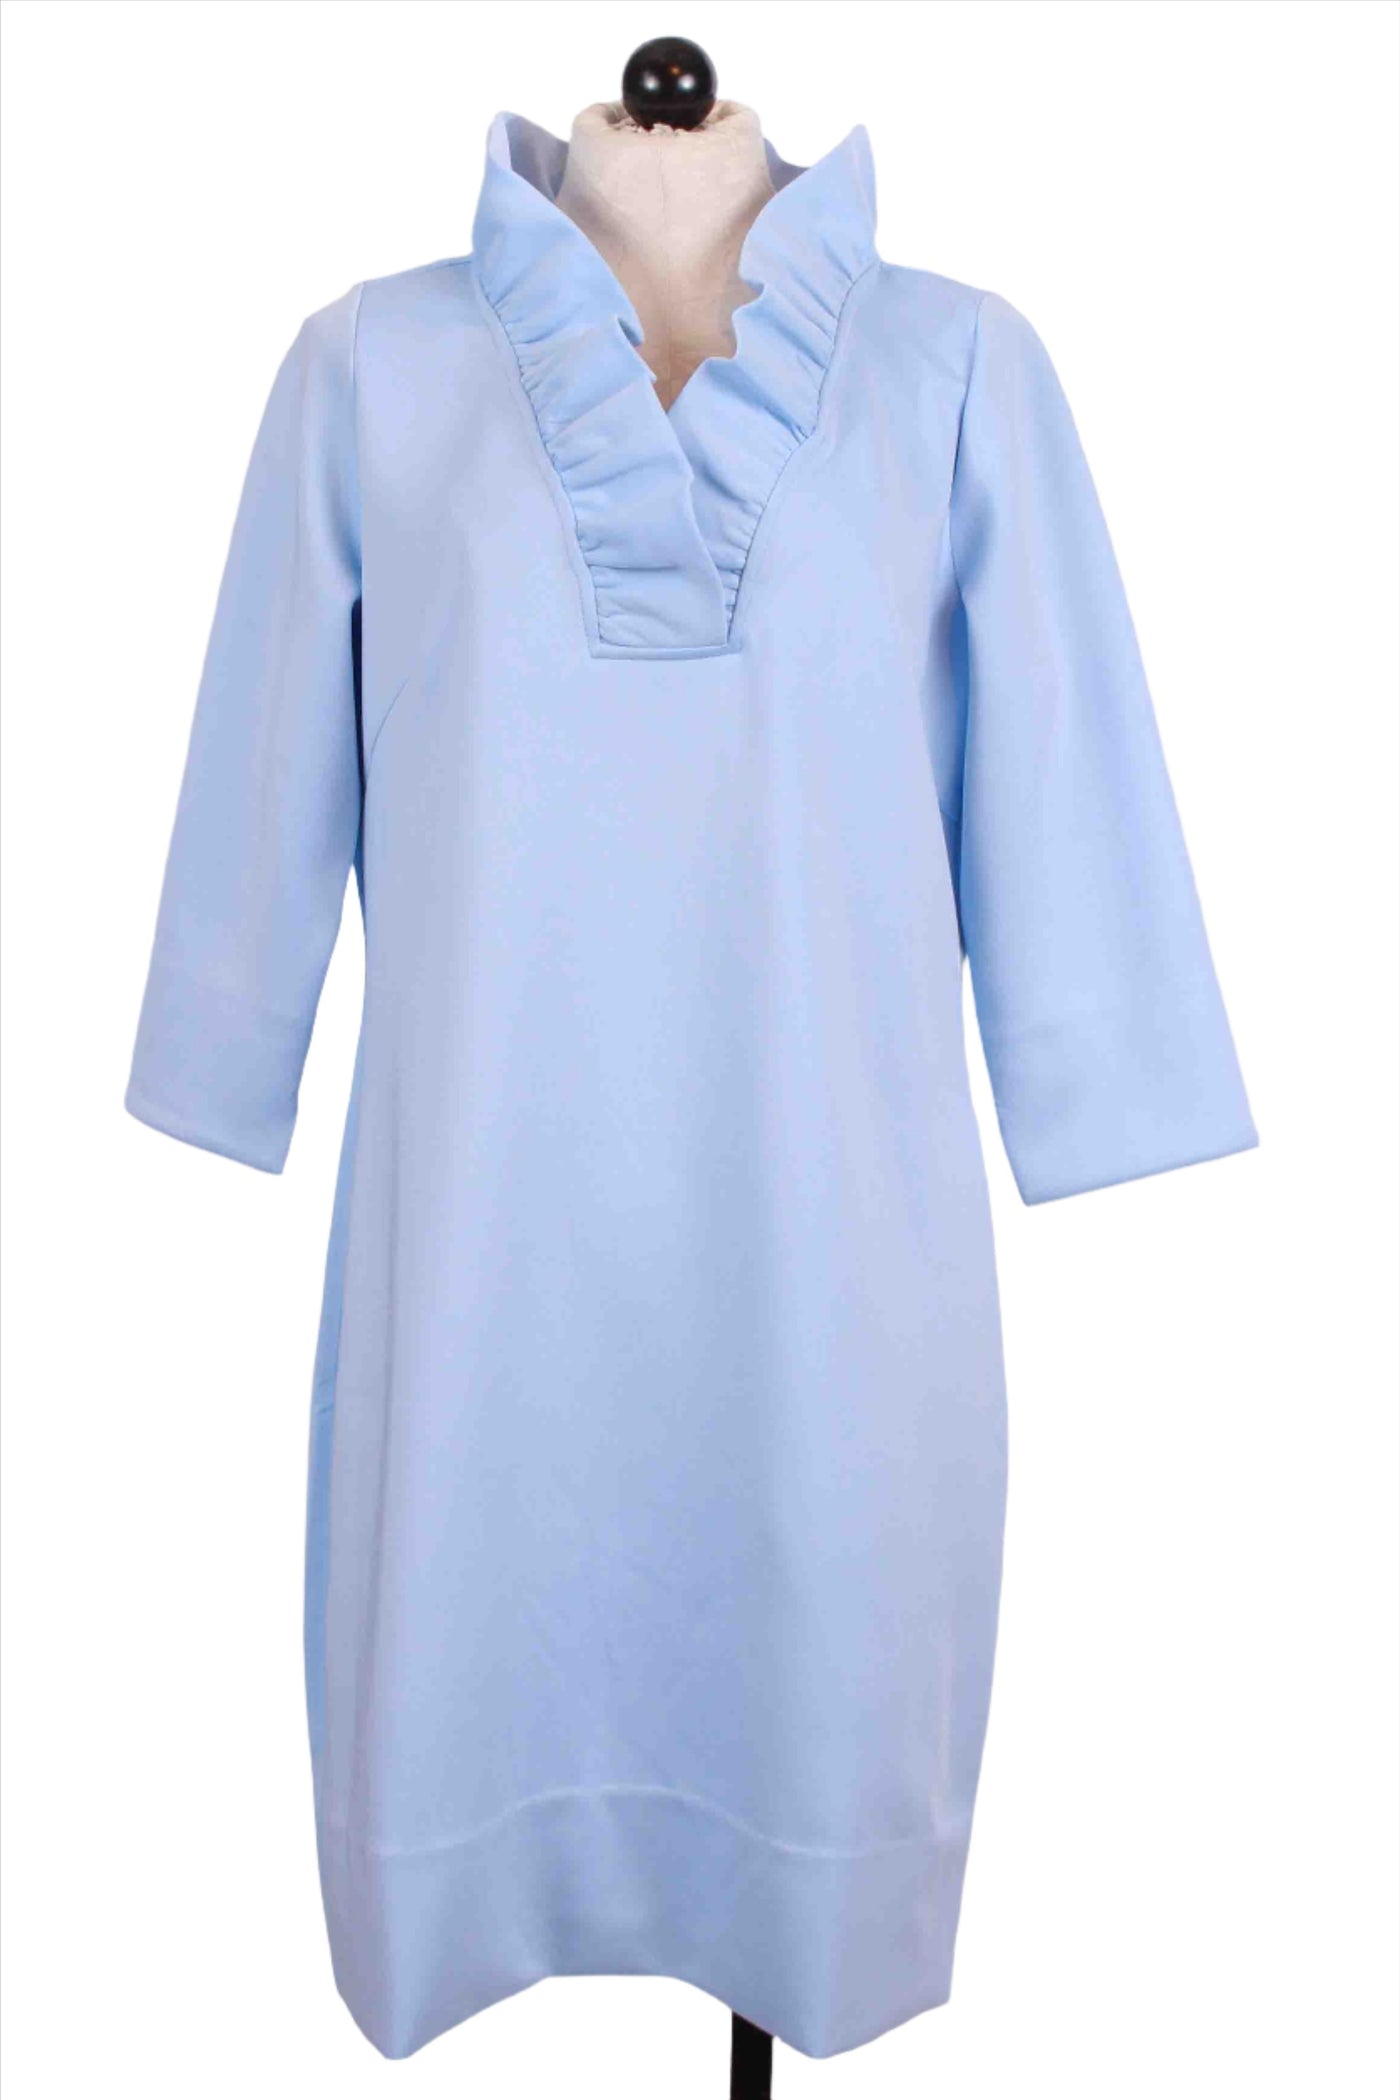 3/4 sleeve solid periwinkle dress has a stand up 2 1/2" ruffled V Neck collar